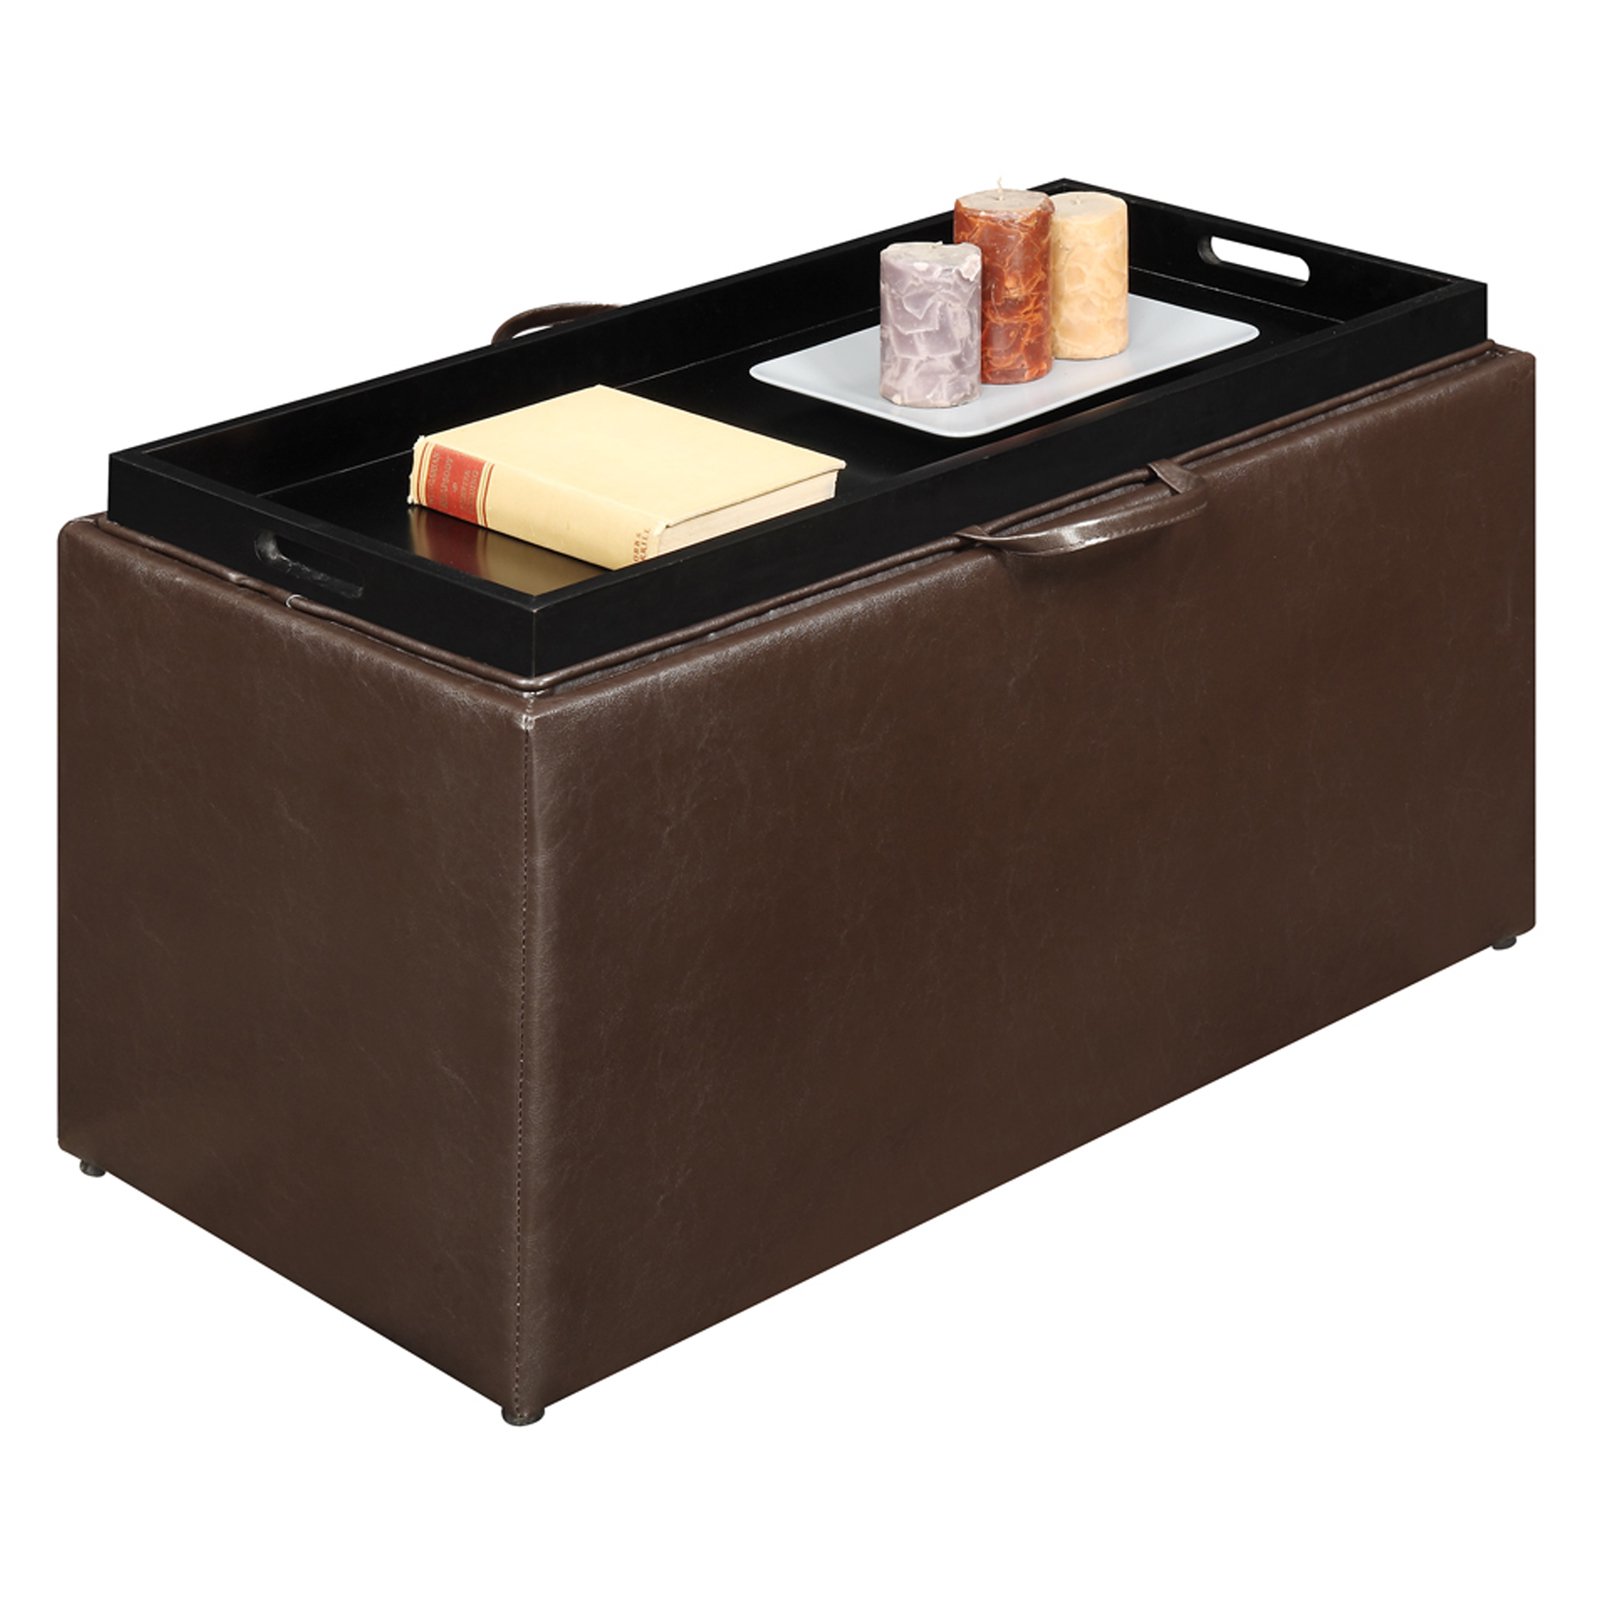 Designs4Comfort Faux Leather Storage Bench with 4 Collapsible Ottomans, Espresso - image 5 of 7